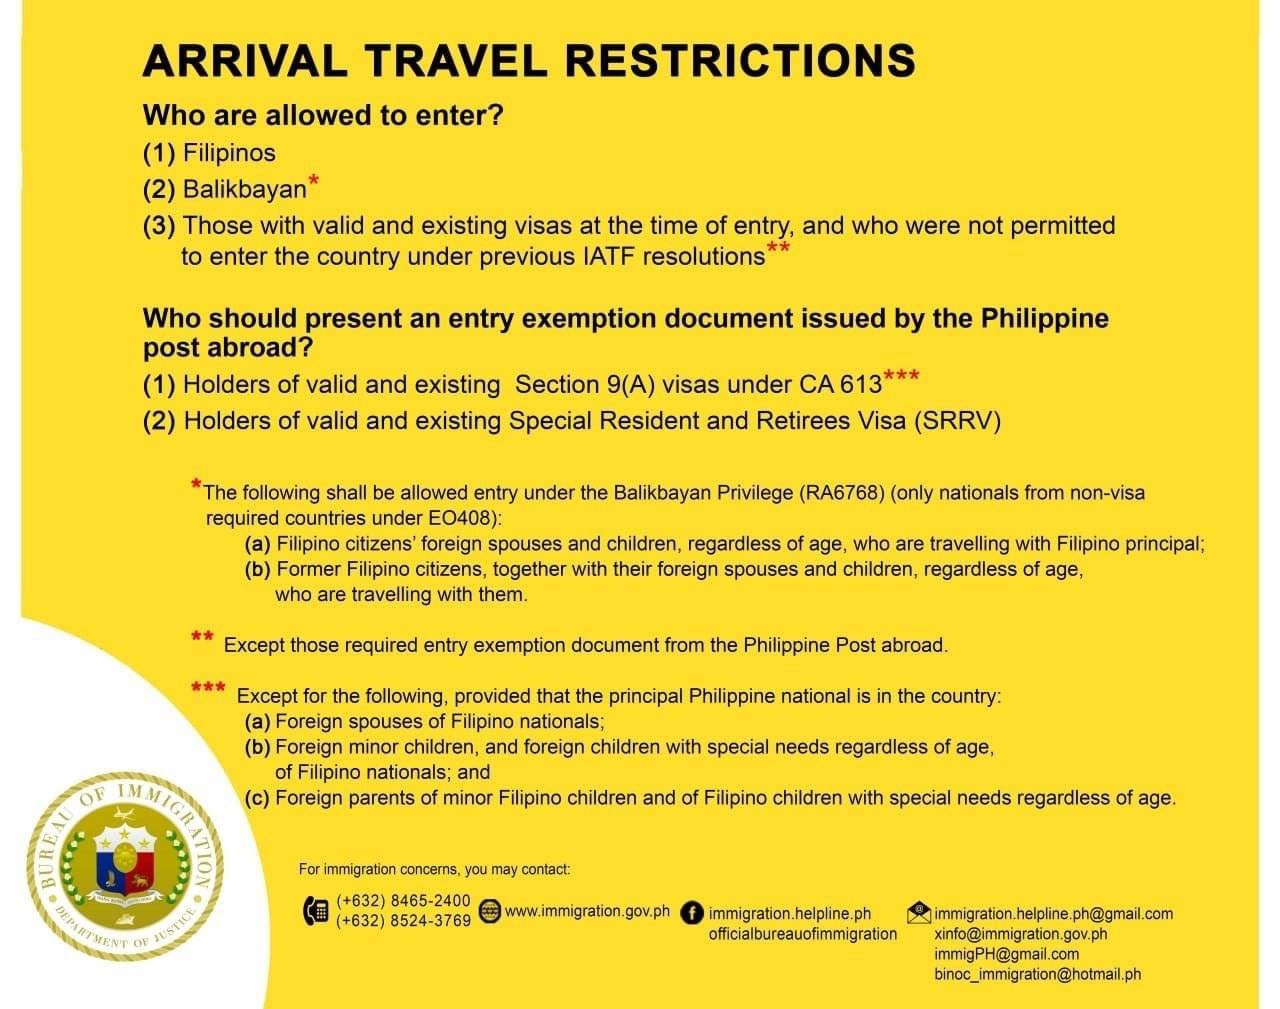 UPDATED TRAVEL RESTRICTIONS IN THE PHILIPPINES AS OF 08 MARCH 2021